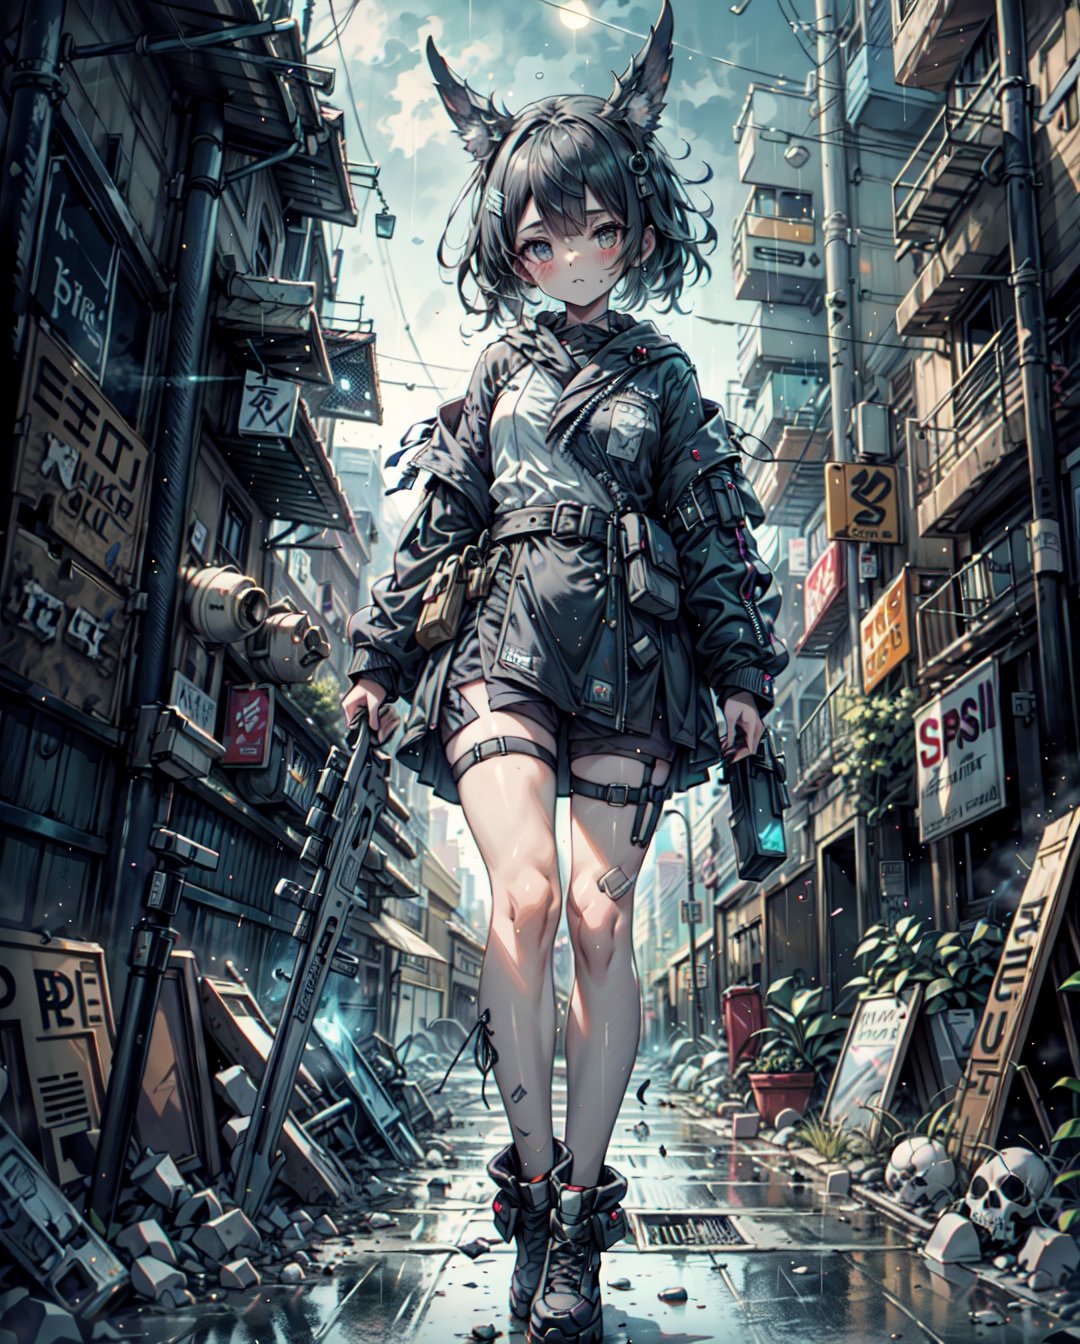 ((Best Quality)), ((Masterpiece)), (highly detailed:1.3), In a cyberpunk city a street in the slums with its bars and a brothel and its girls and clients at Night in the Rain, dashi, films, Songs inspired by Bladerunner, Inspired by Syd Mead, HDR (High Dynamic Range), Ray tracing, NVIDIA RTX, The ultra-Highres, Unreal 5, Subsurface scattering, PBR Texturing, Post-Processing, Anisotropic Filtering, depth of fields, Maximum Sharpness and Sharpness,multi-layered texture, Albedo and Specular maps, Surface Shading, Precise simulation of light-material interactions, perfect proportions, octane render, Two-tone illumination, low ISO, white balance, rule of thirds, Wide aperture,8K Raw, efficient sub-pixel,sub-pixel convolution, light scattering, Tyndall Effect, Cyberpunk, Human bones,Human bones,photorealistic,midjourney,fantasy00d,FFIXBG,weapon